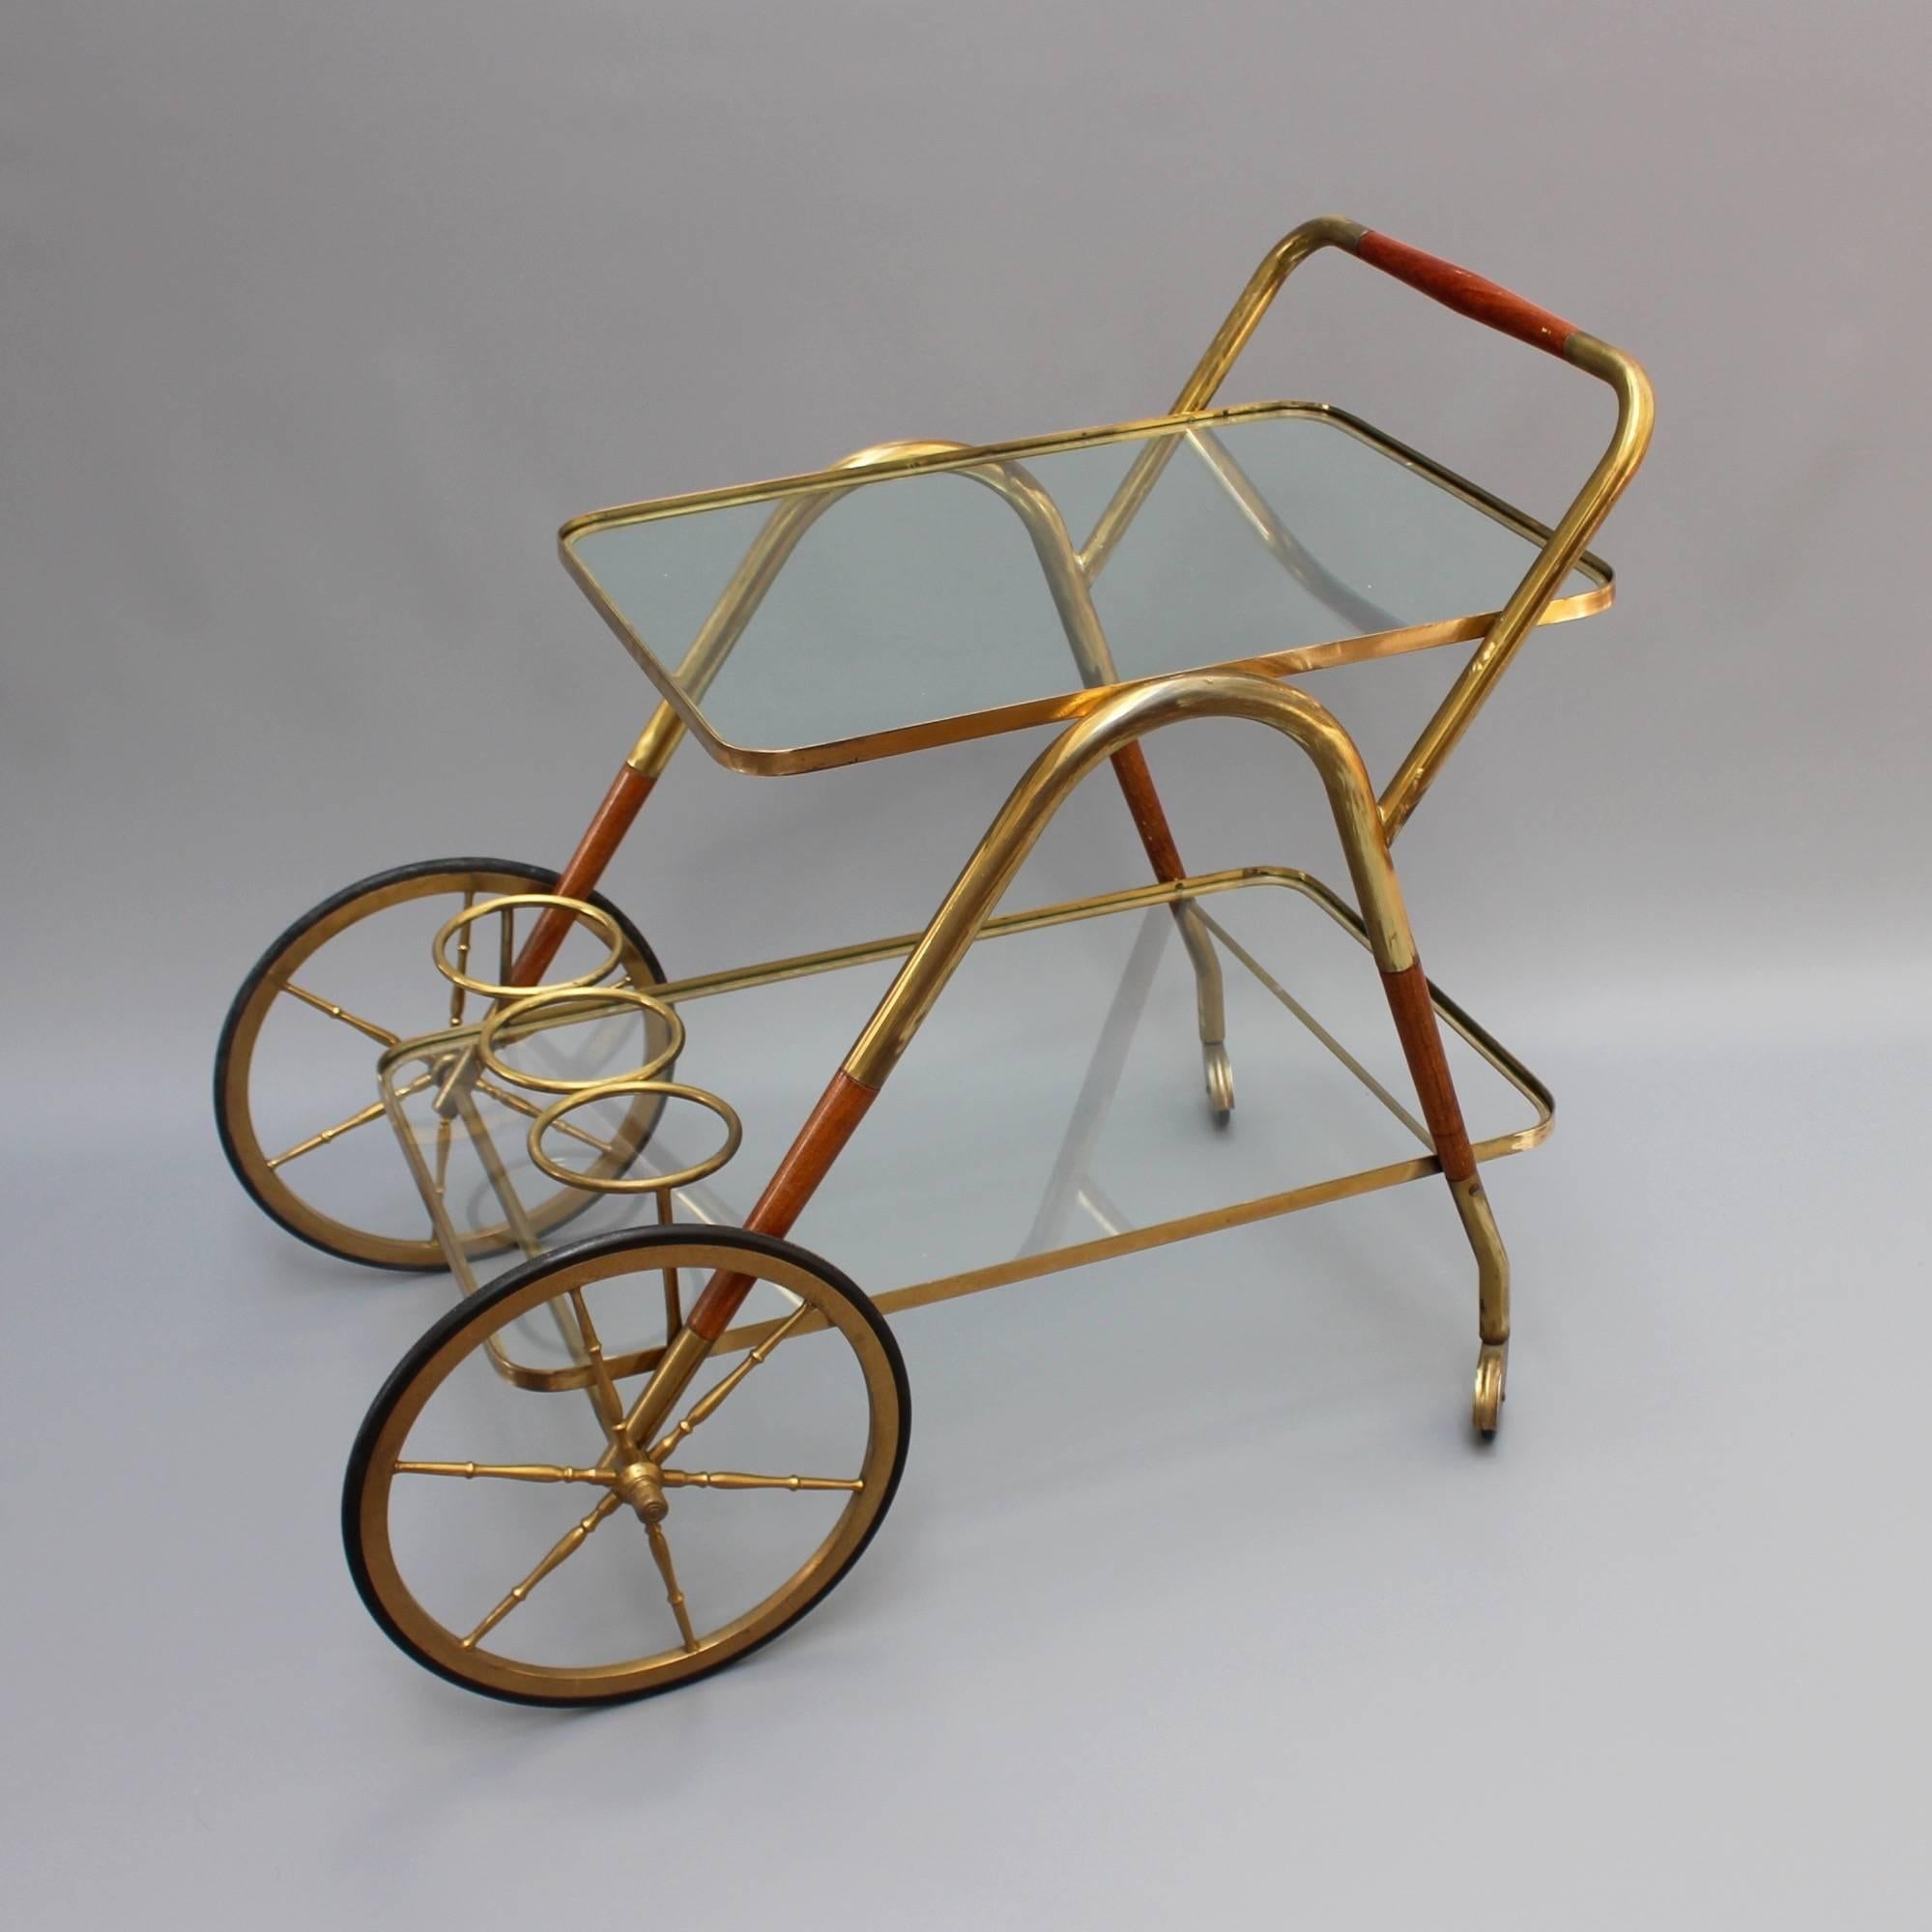 Born in Naples in 1929, Italian architect-designer Cesare Lacca created modernist furniture and metalwork throughout the 1950s. Lacca designed a great many tea carts and serving trolleys in his career as well as magazine racks and coffee tables.